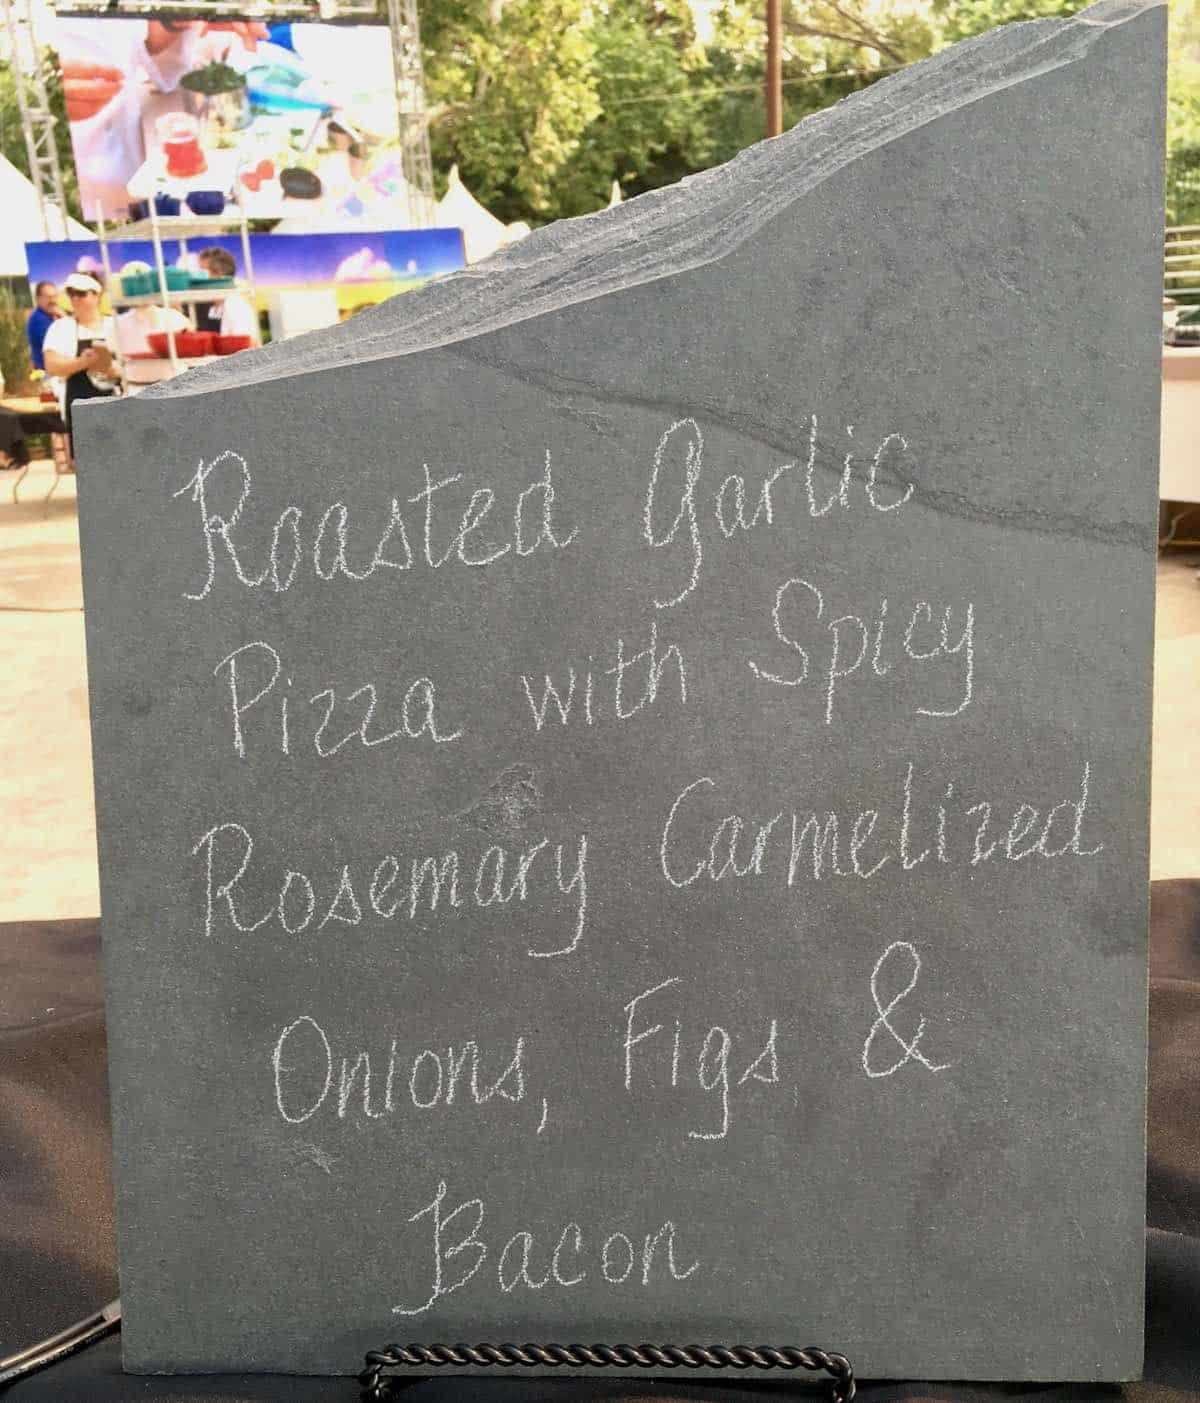 A day in the life of a cook-off contestant shows a sign of her recipe roasted garlic pizza with spicy rosemary carmelized onions, figs and bacon.